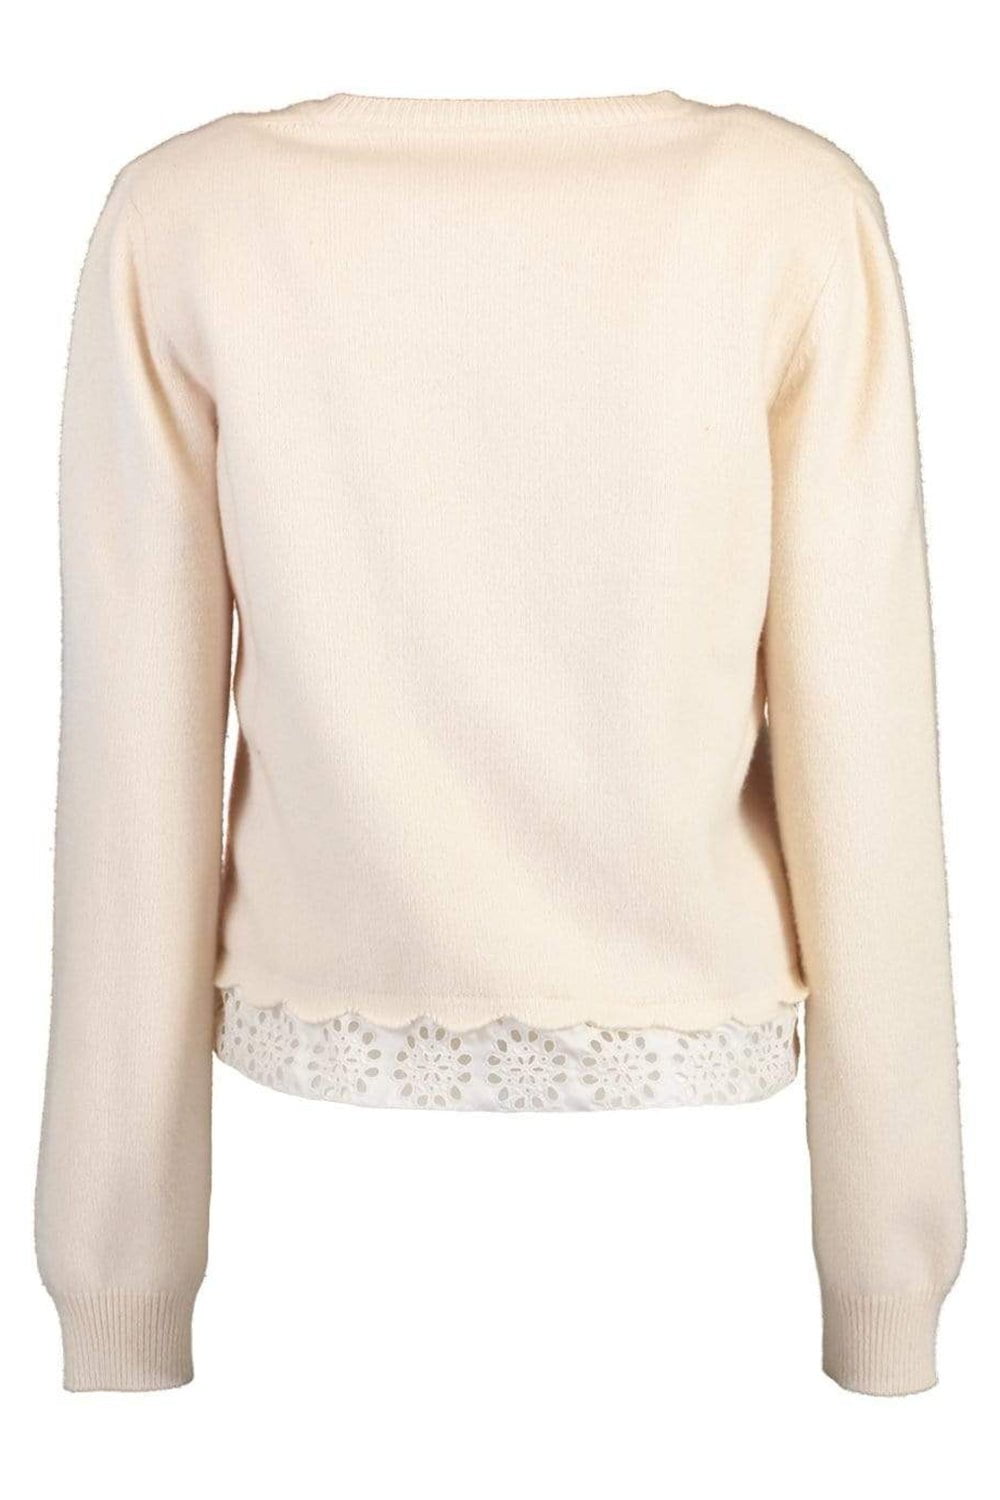 MARC JACOBS-Wool Cashmere Silk Eyelet Sweater-WHITE